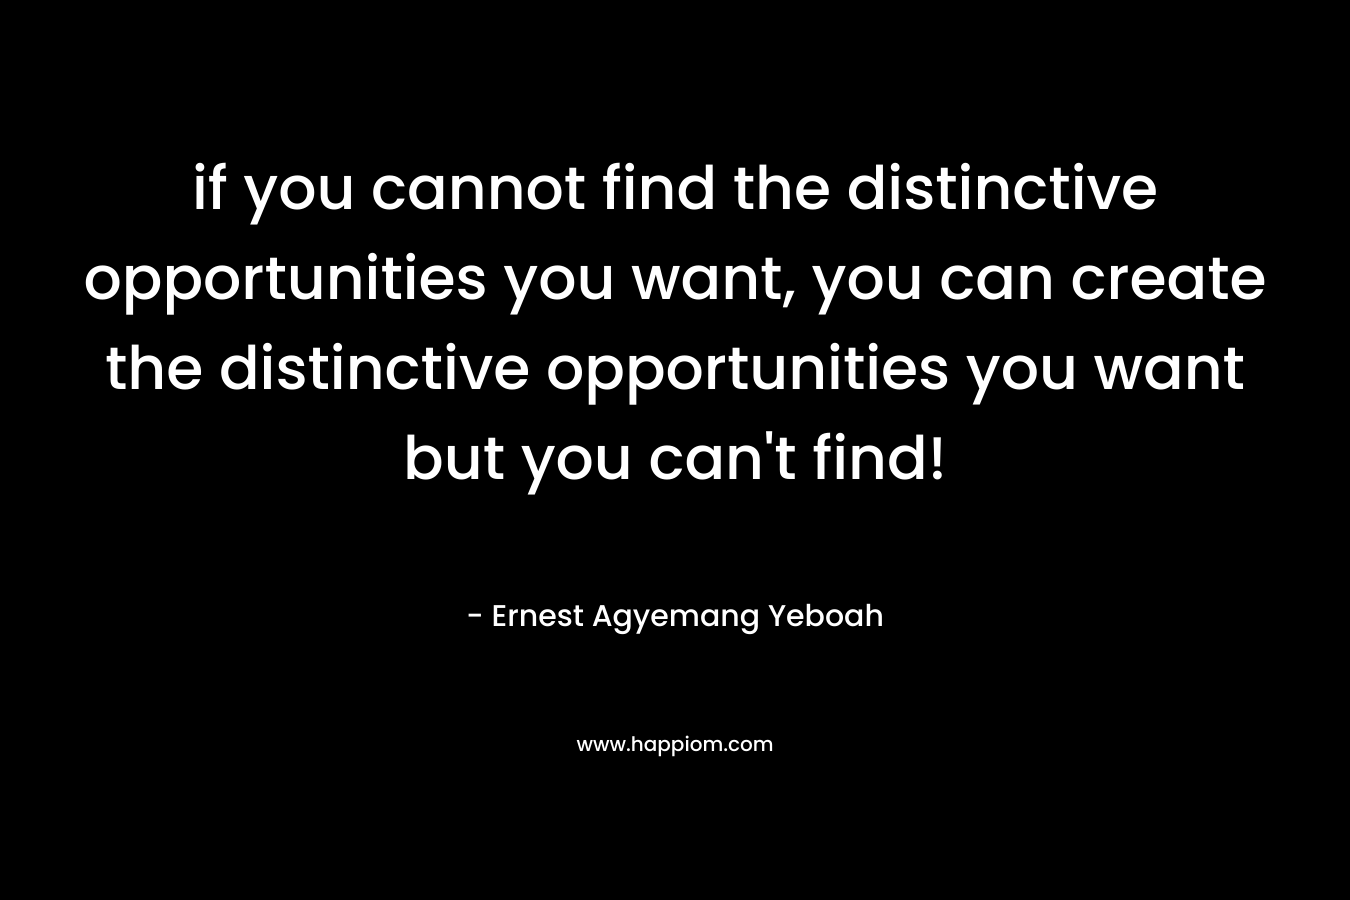 if you cannot find the distinctive opportunities you want, you can create the distinctive opportunities you want but you can't find!